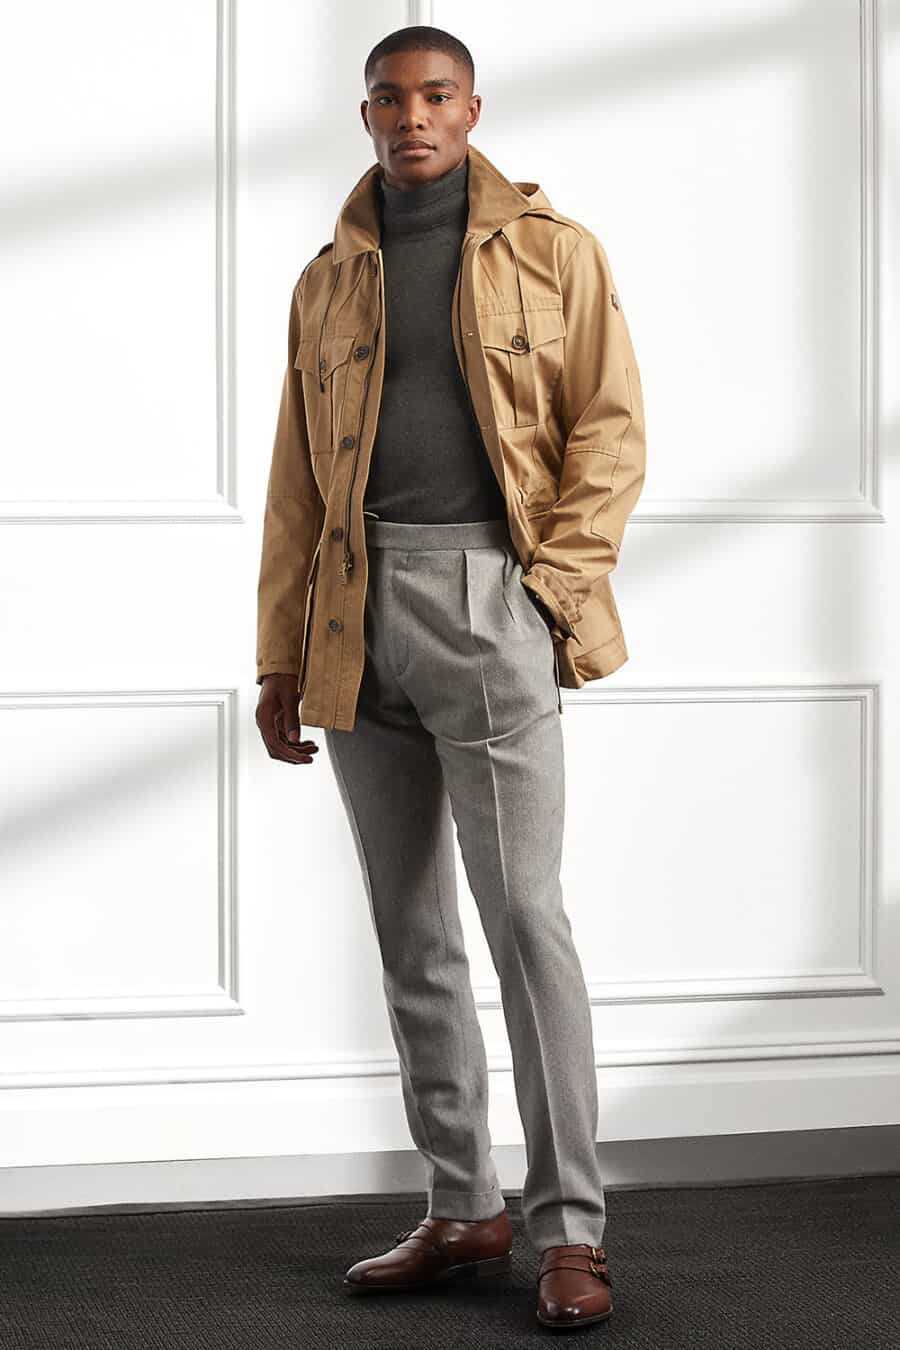 Men's grey tailored wool pants, charcoal turtleneck, brown leather double monk straps and khaki safari jacket outfit